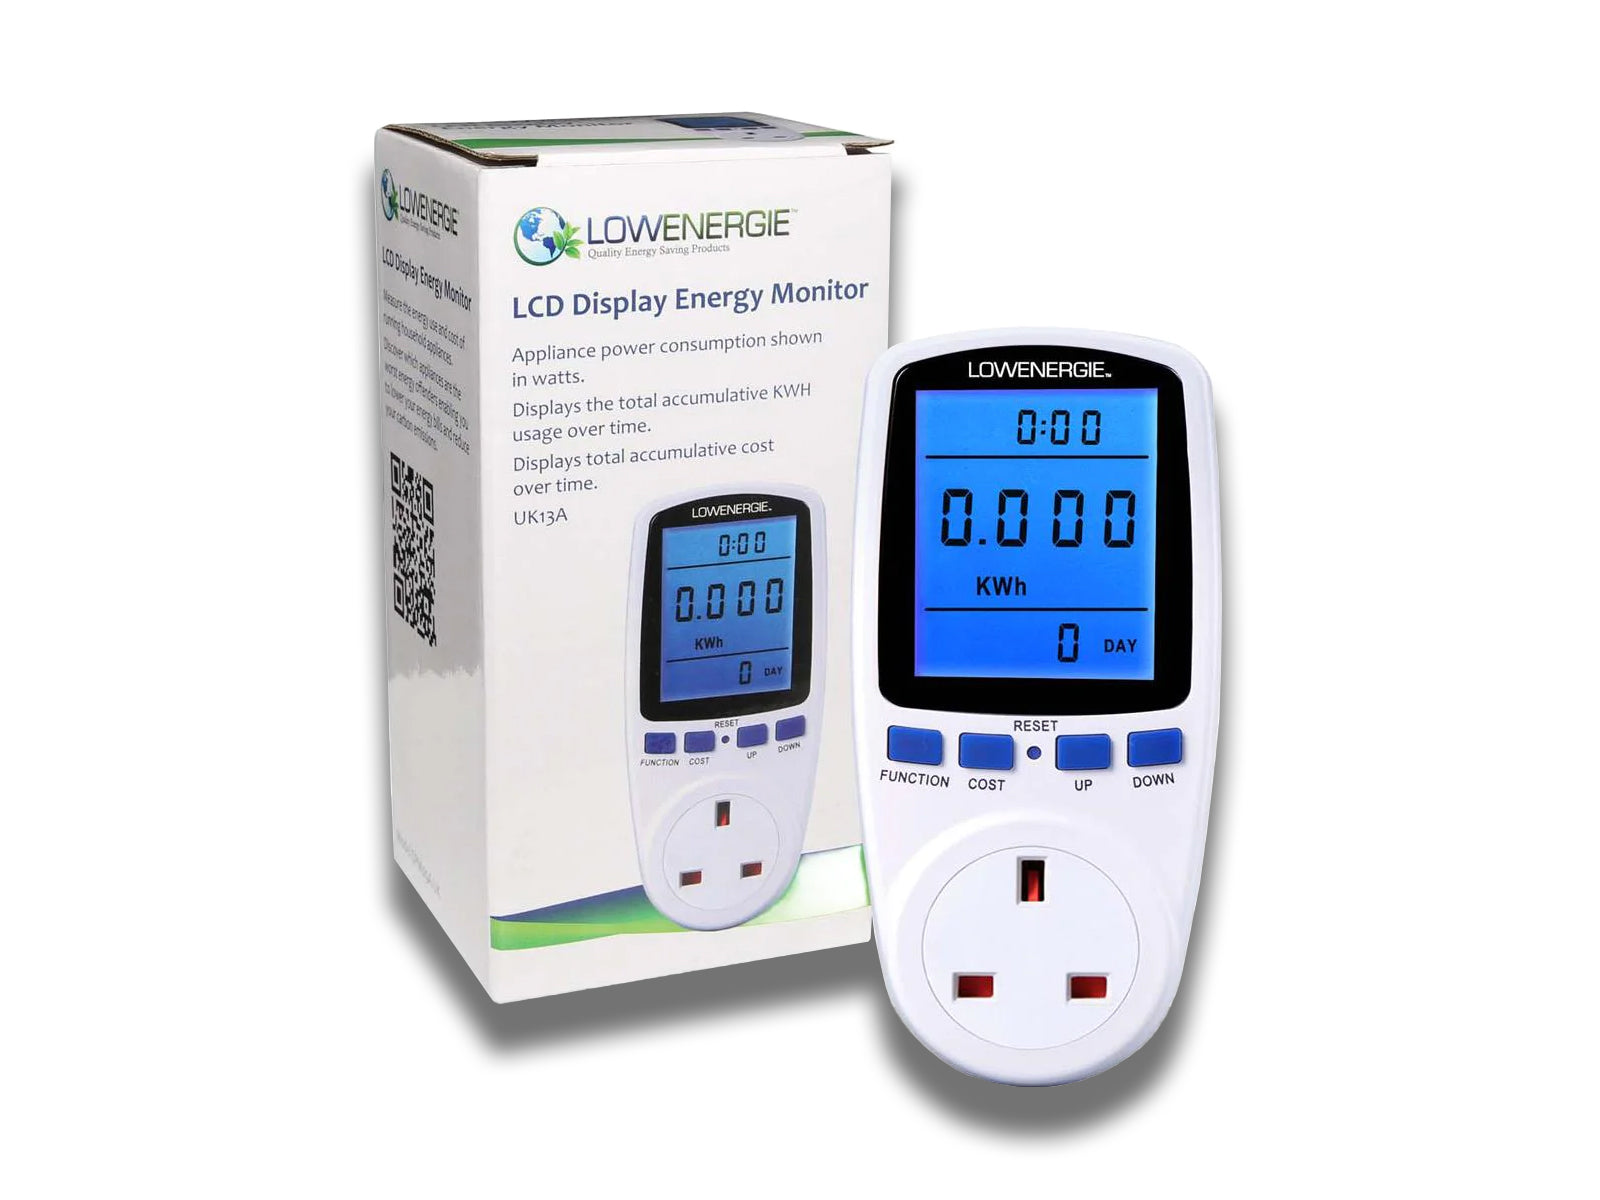 Image shows front view of energy monitor along with packaging on white background